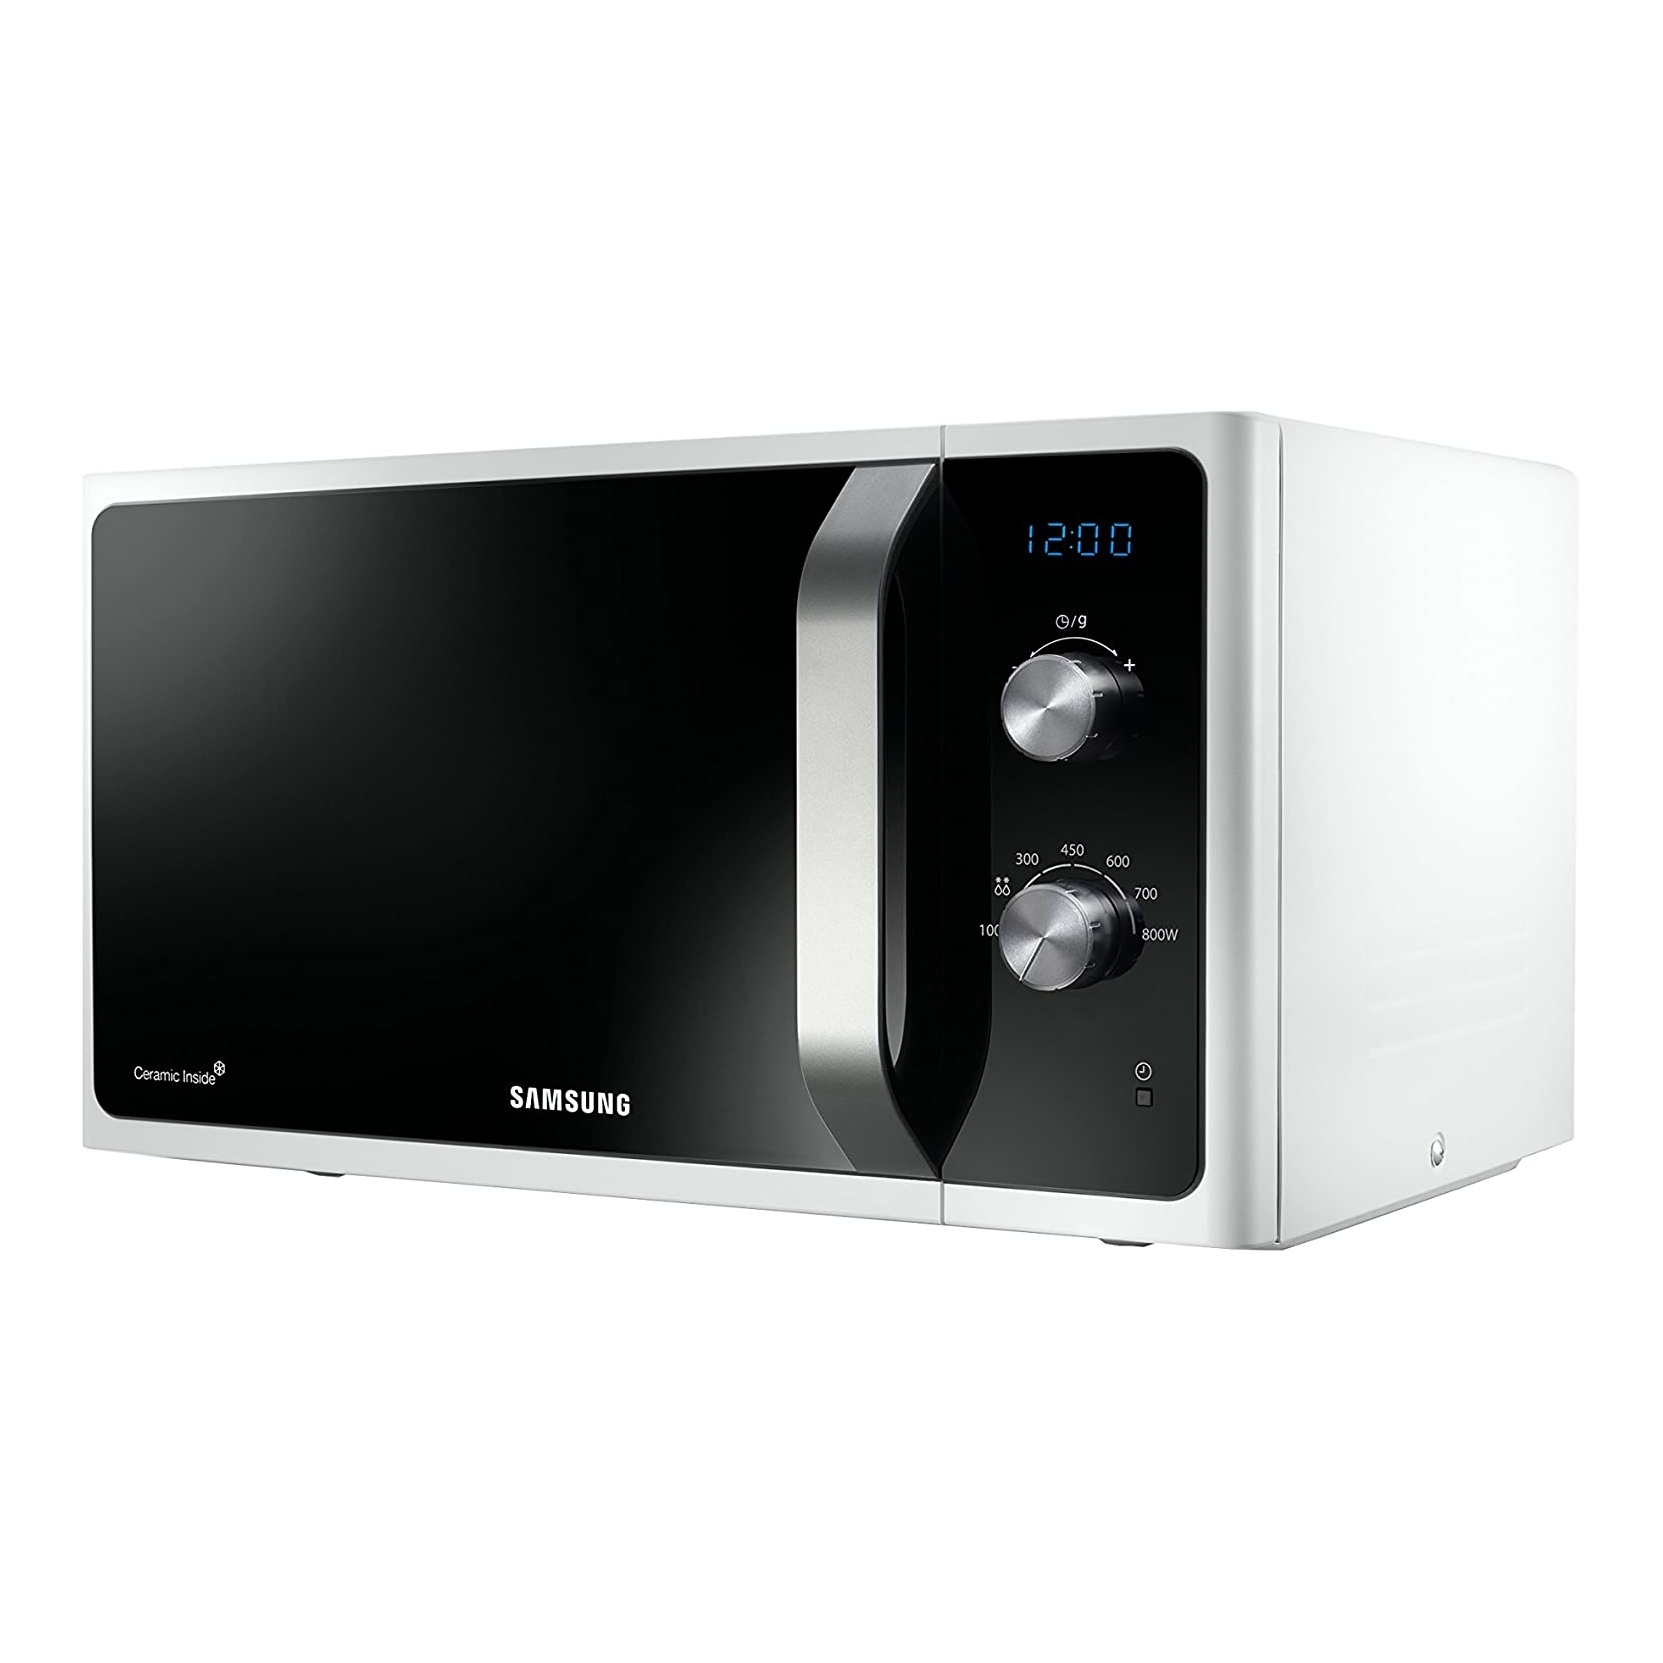 Samsung MG23T5018GE Forno Microonde Grill 23LT 800W Bianco con